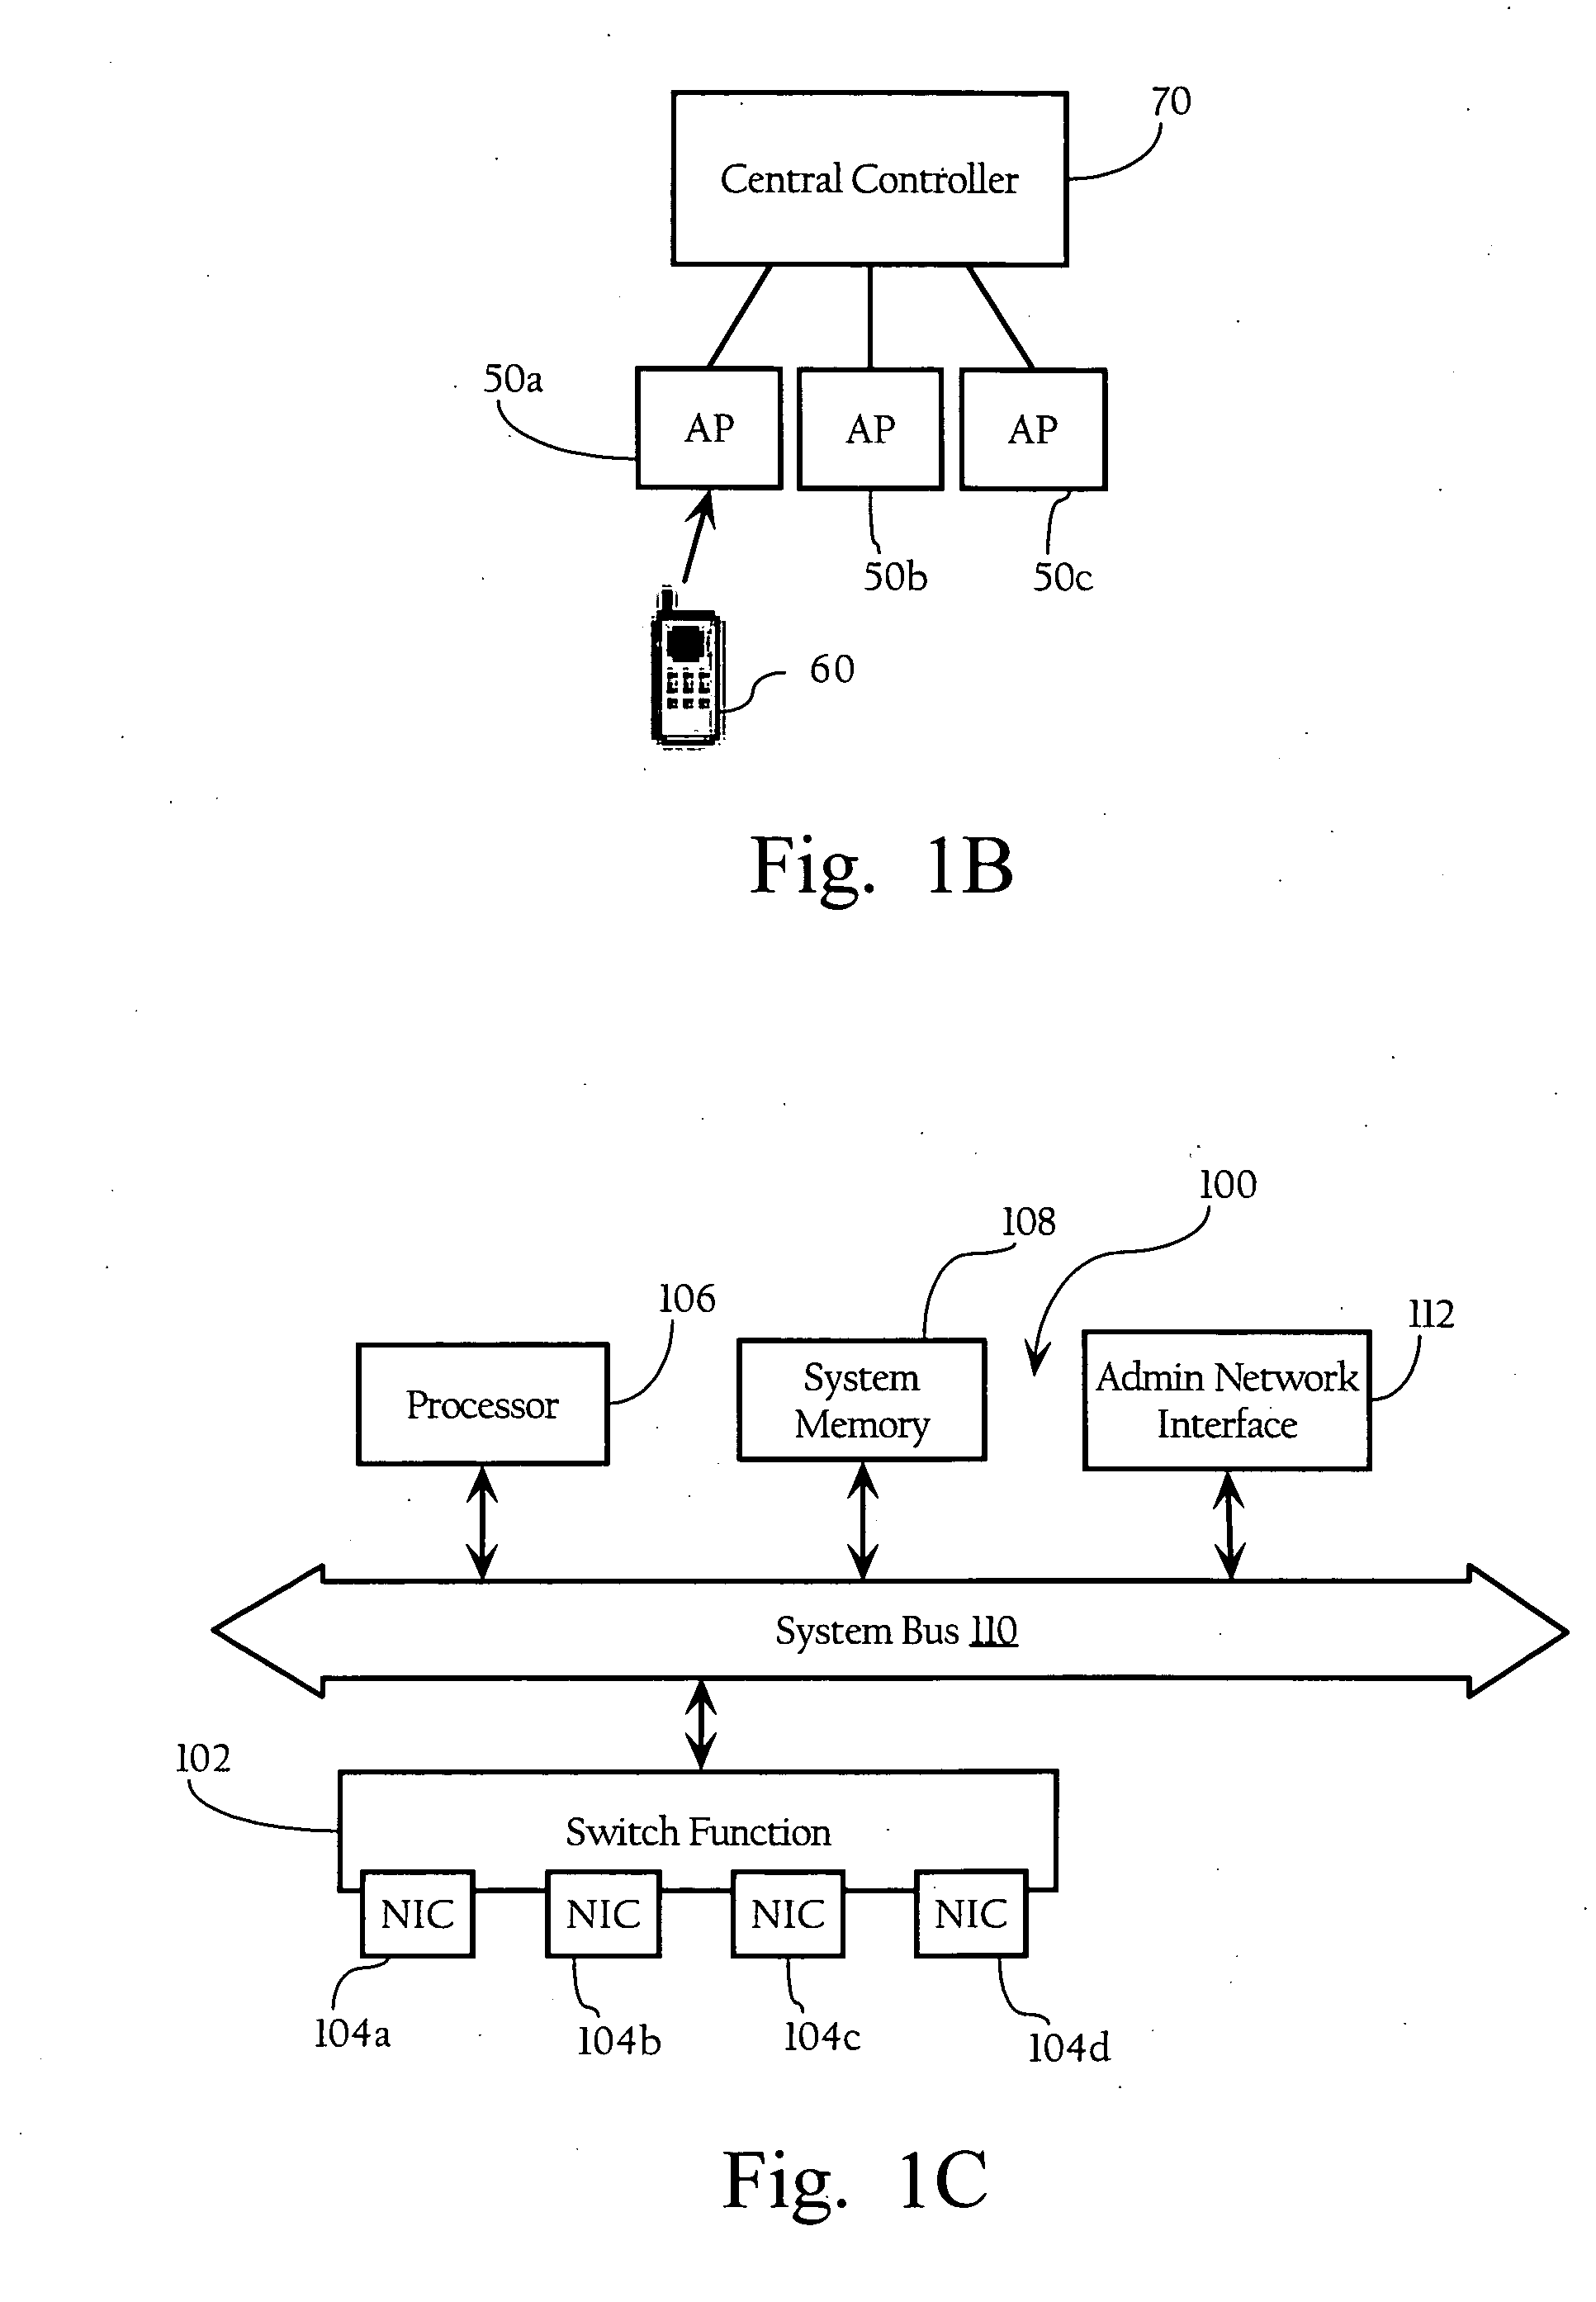 Method and apparatus for selecting an appropriate authentication method on a client